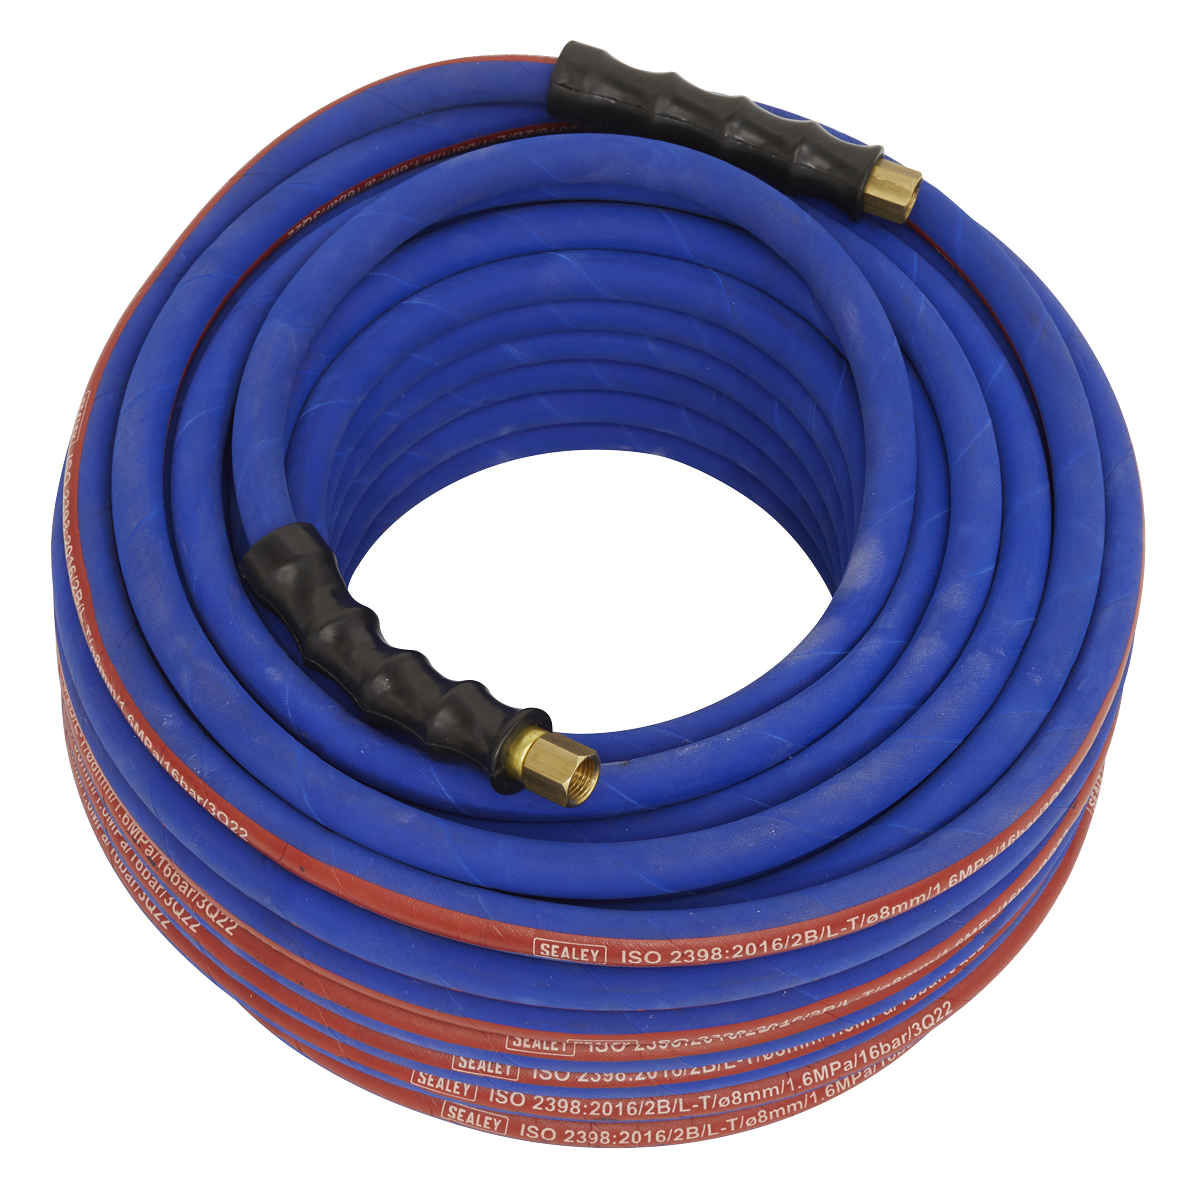 Sealey Tools Air Hose 30m x Ø8mm with 1/4BSP Unions Extra Heavy